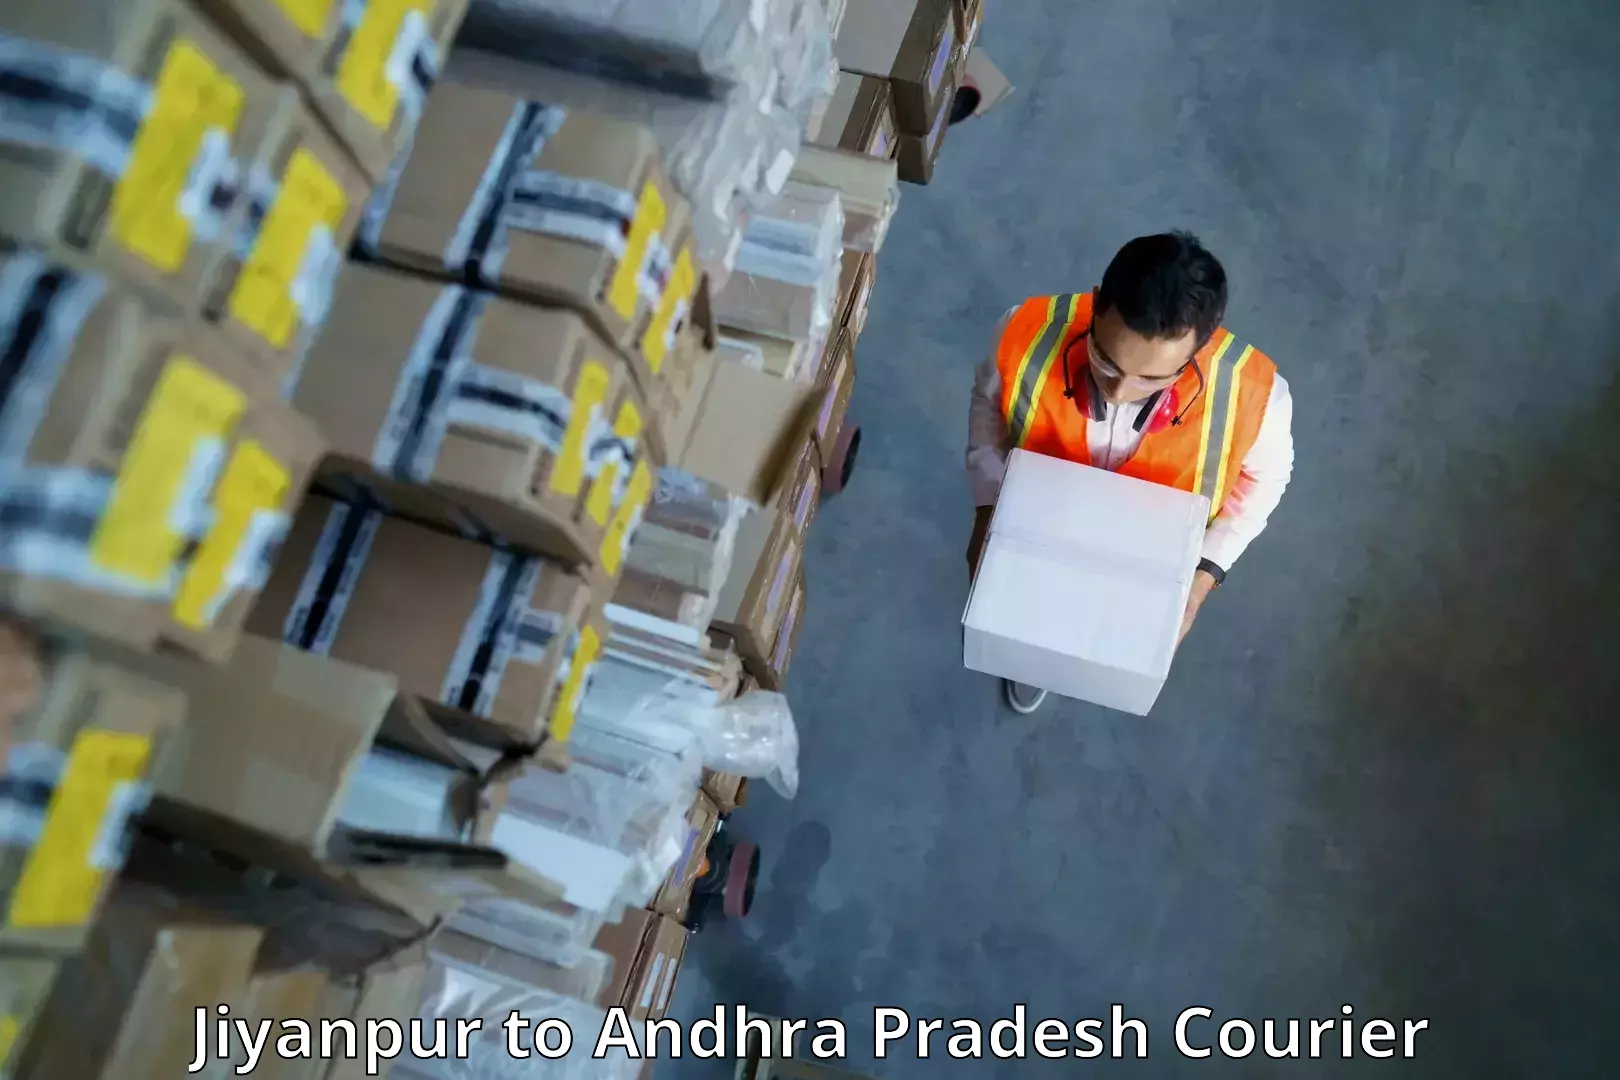 Courier service comparison in Jiyanpur to Anantapur